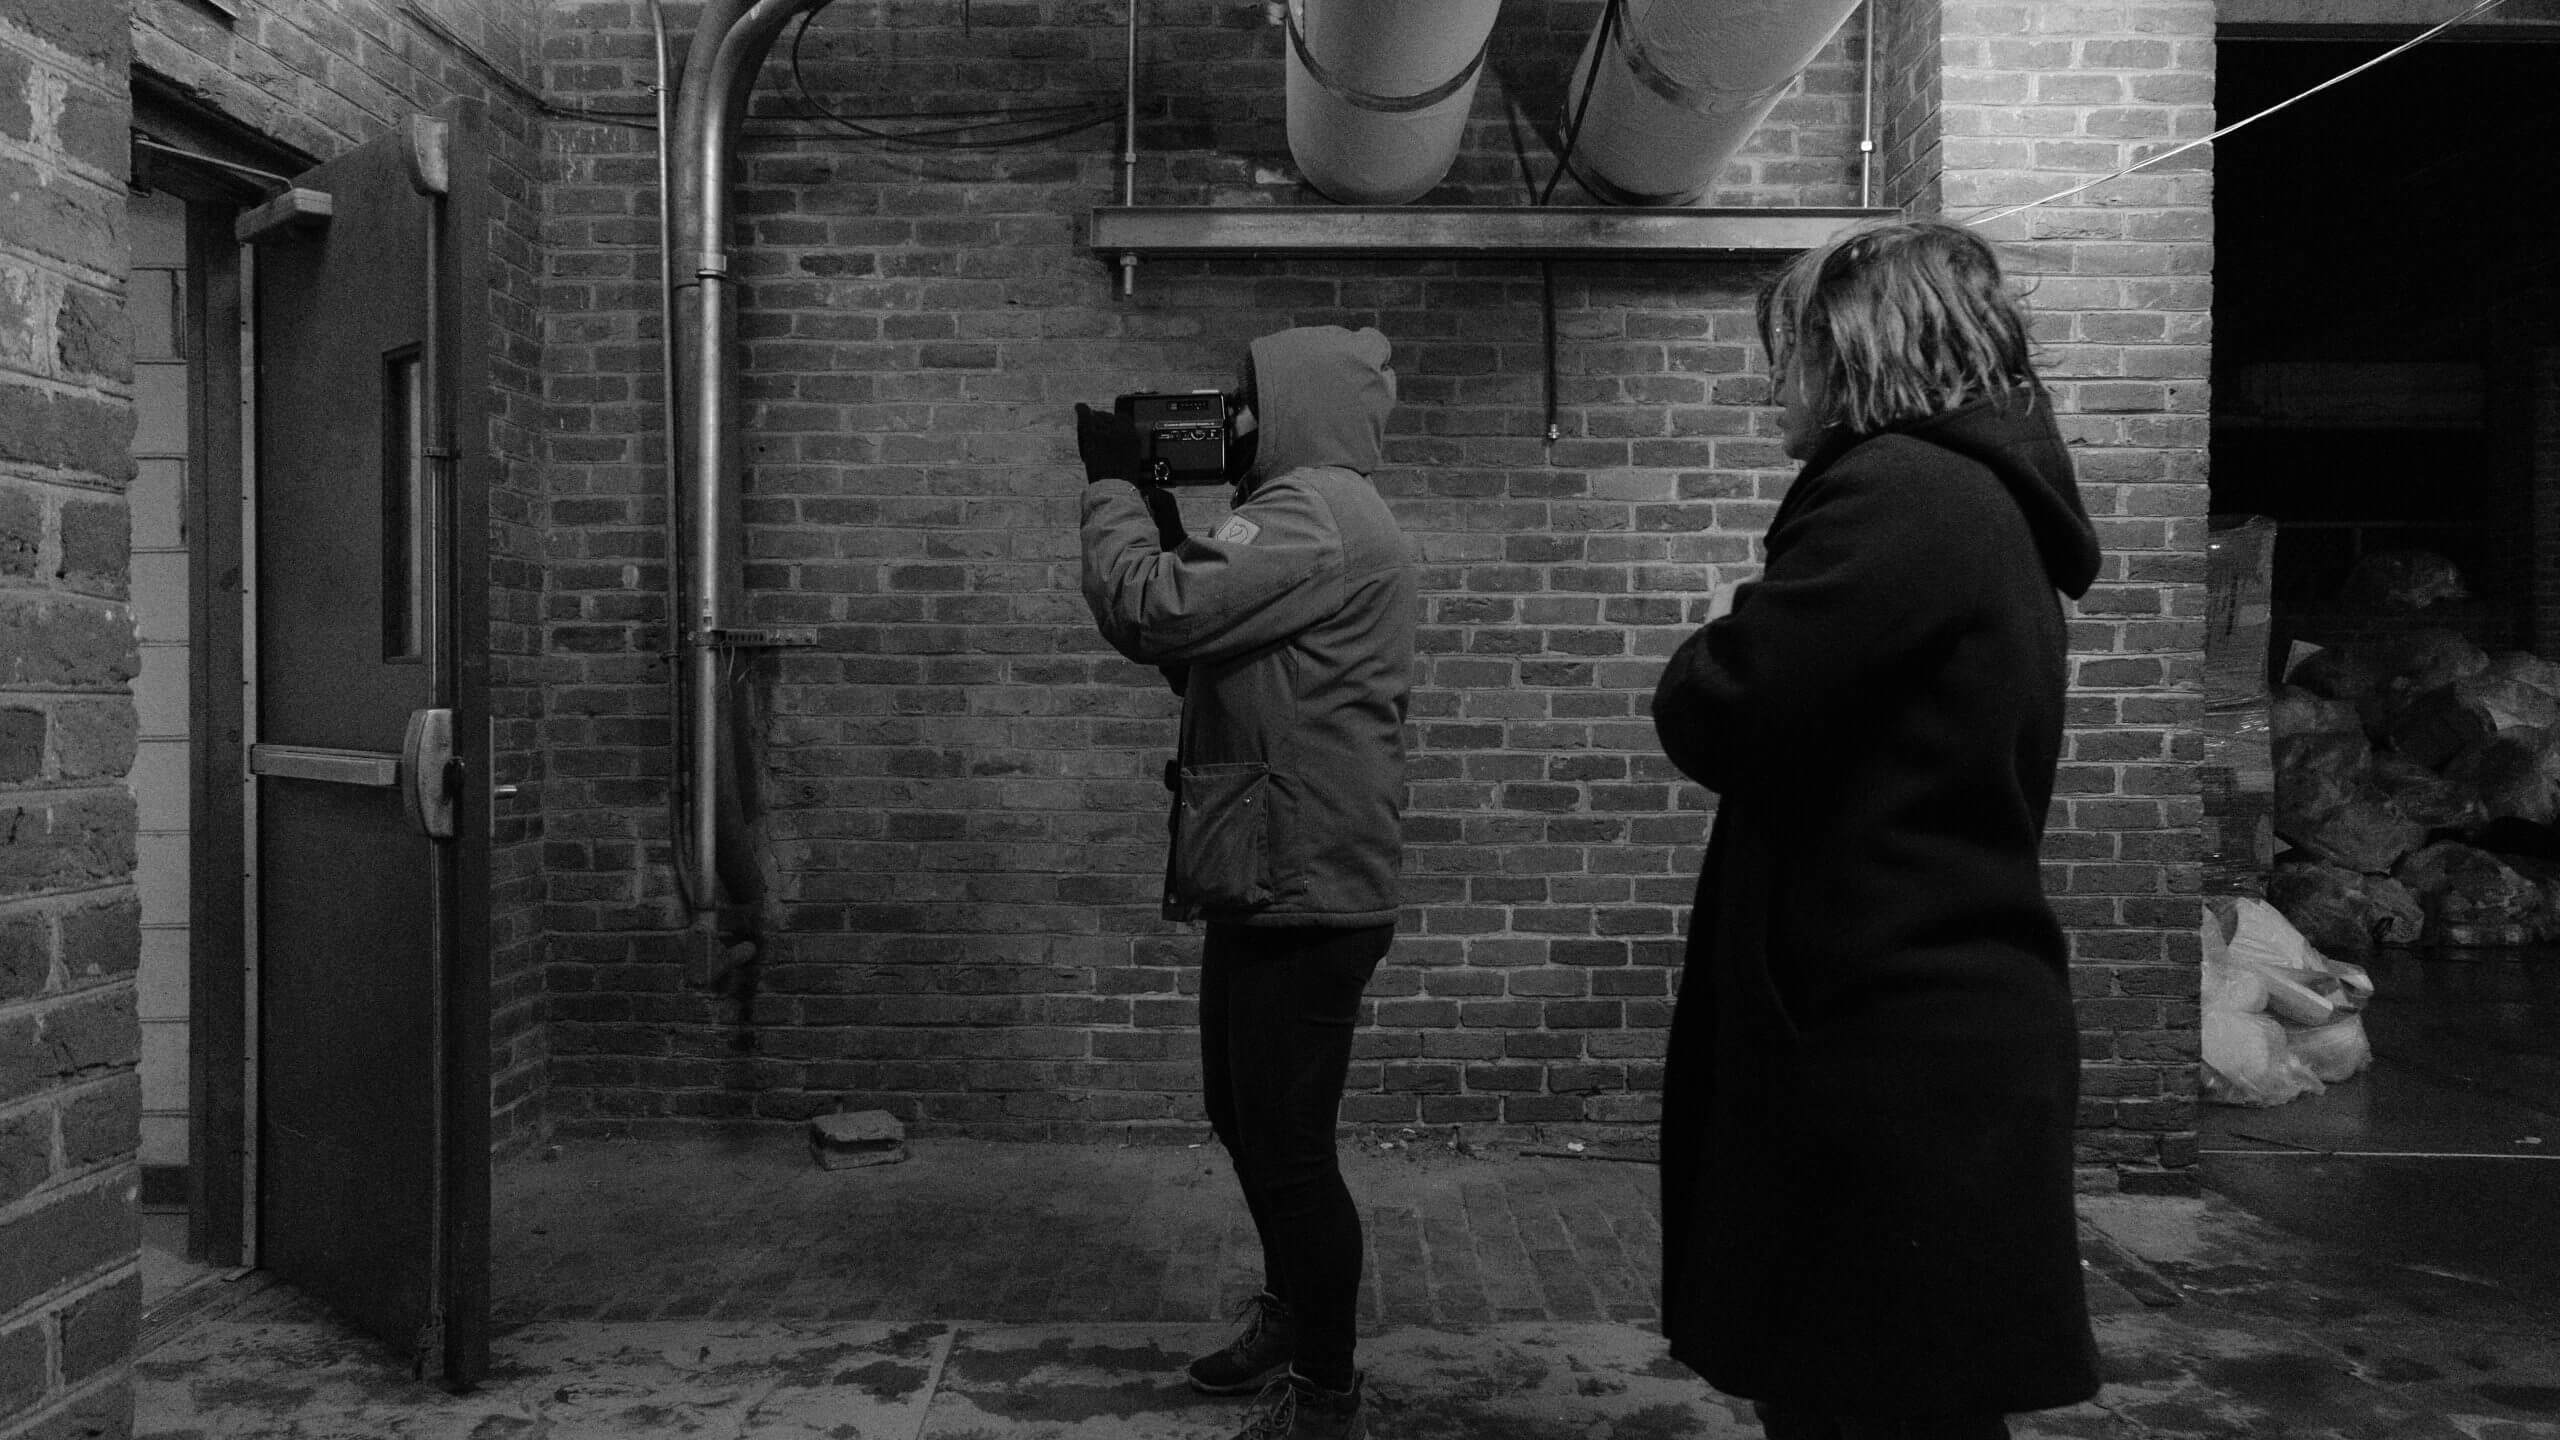 Profile shot of a camera man holding a camera and a woman in a coat behind them